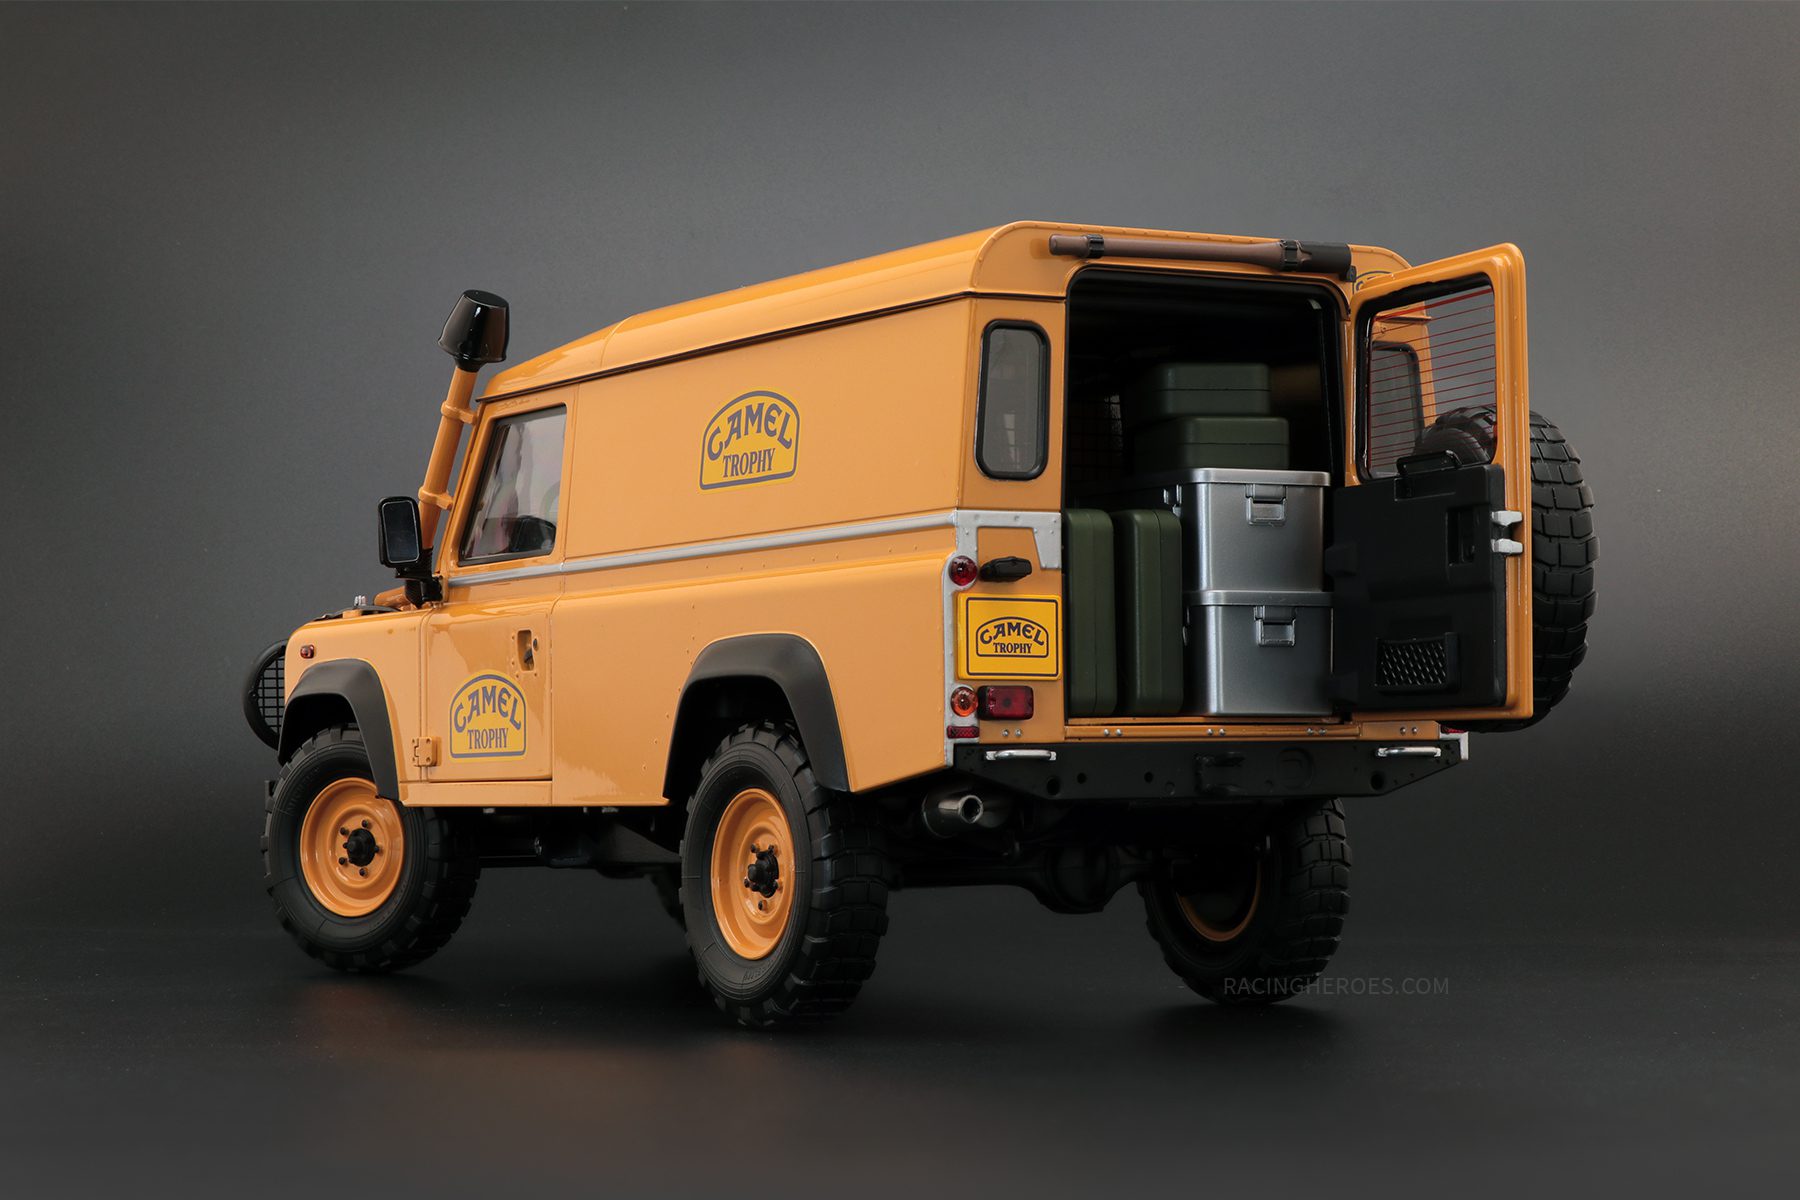 Land Rover Defender 110 “Camel Trophy” Support Unit Borneo 1:18 by Almost Real